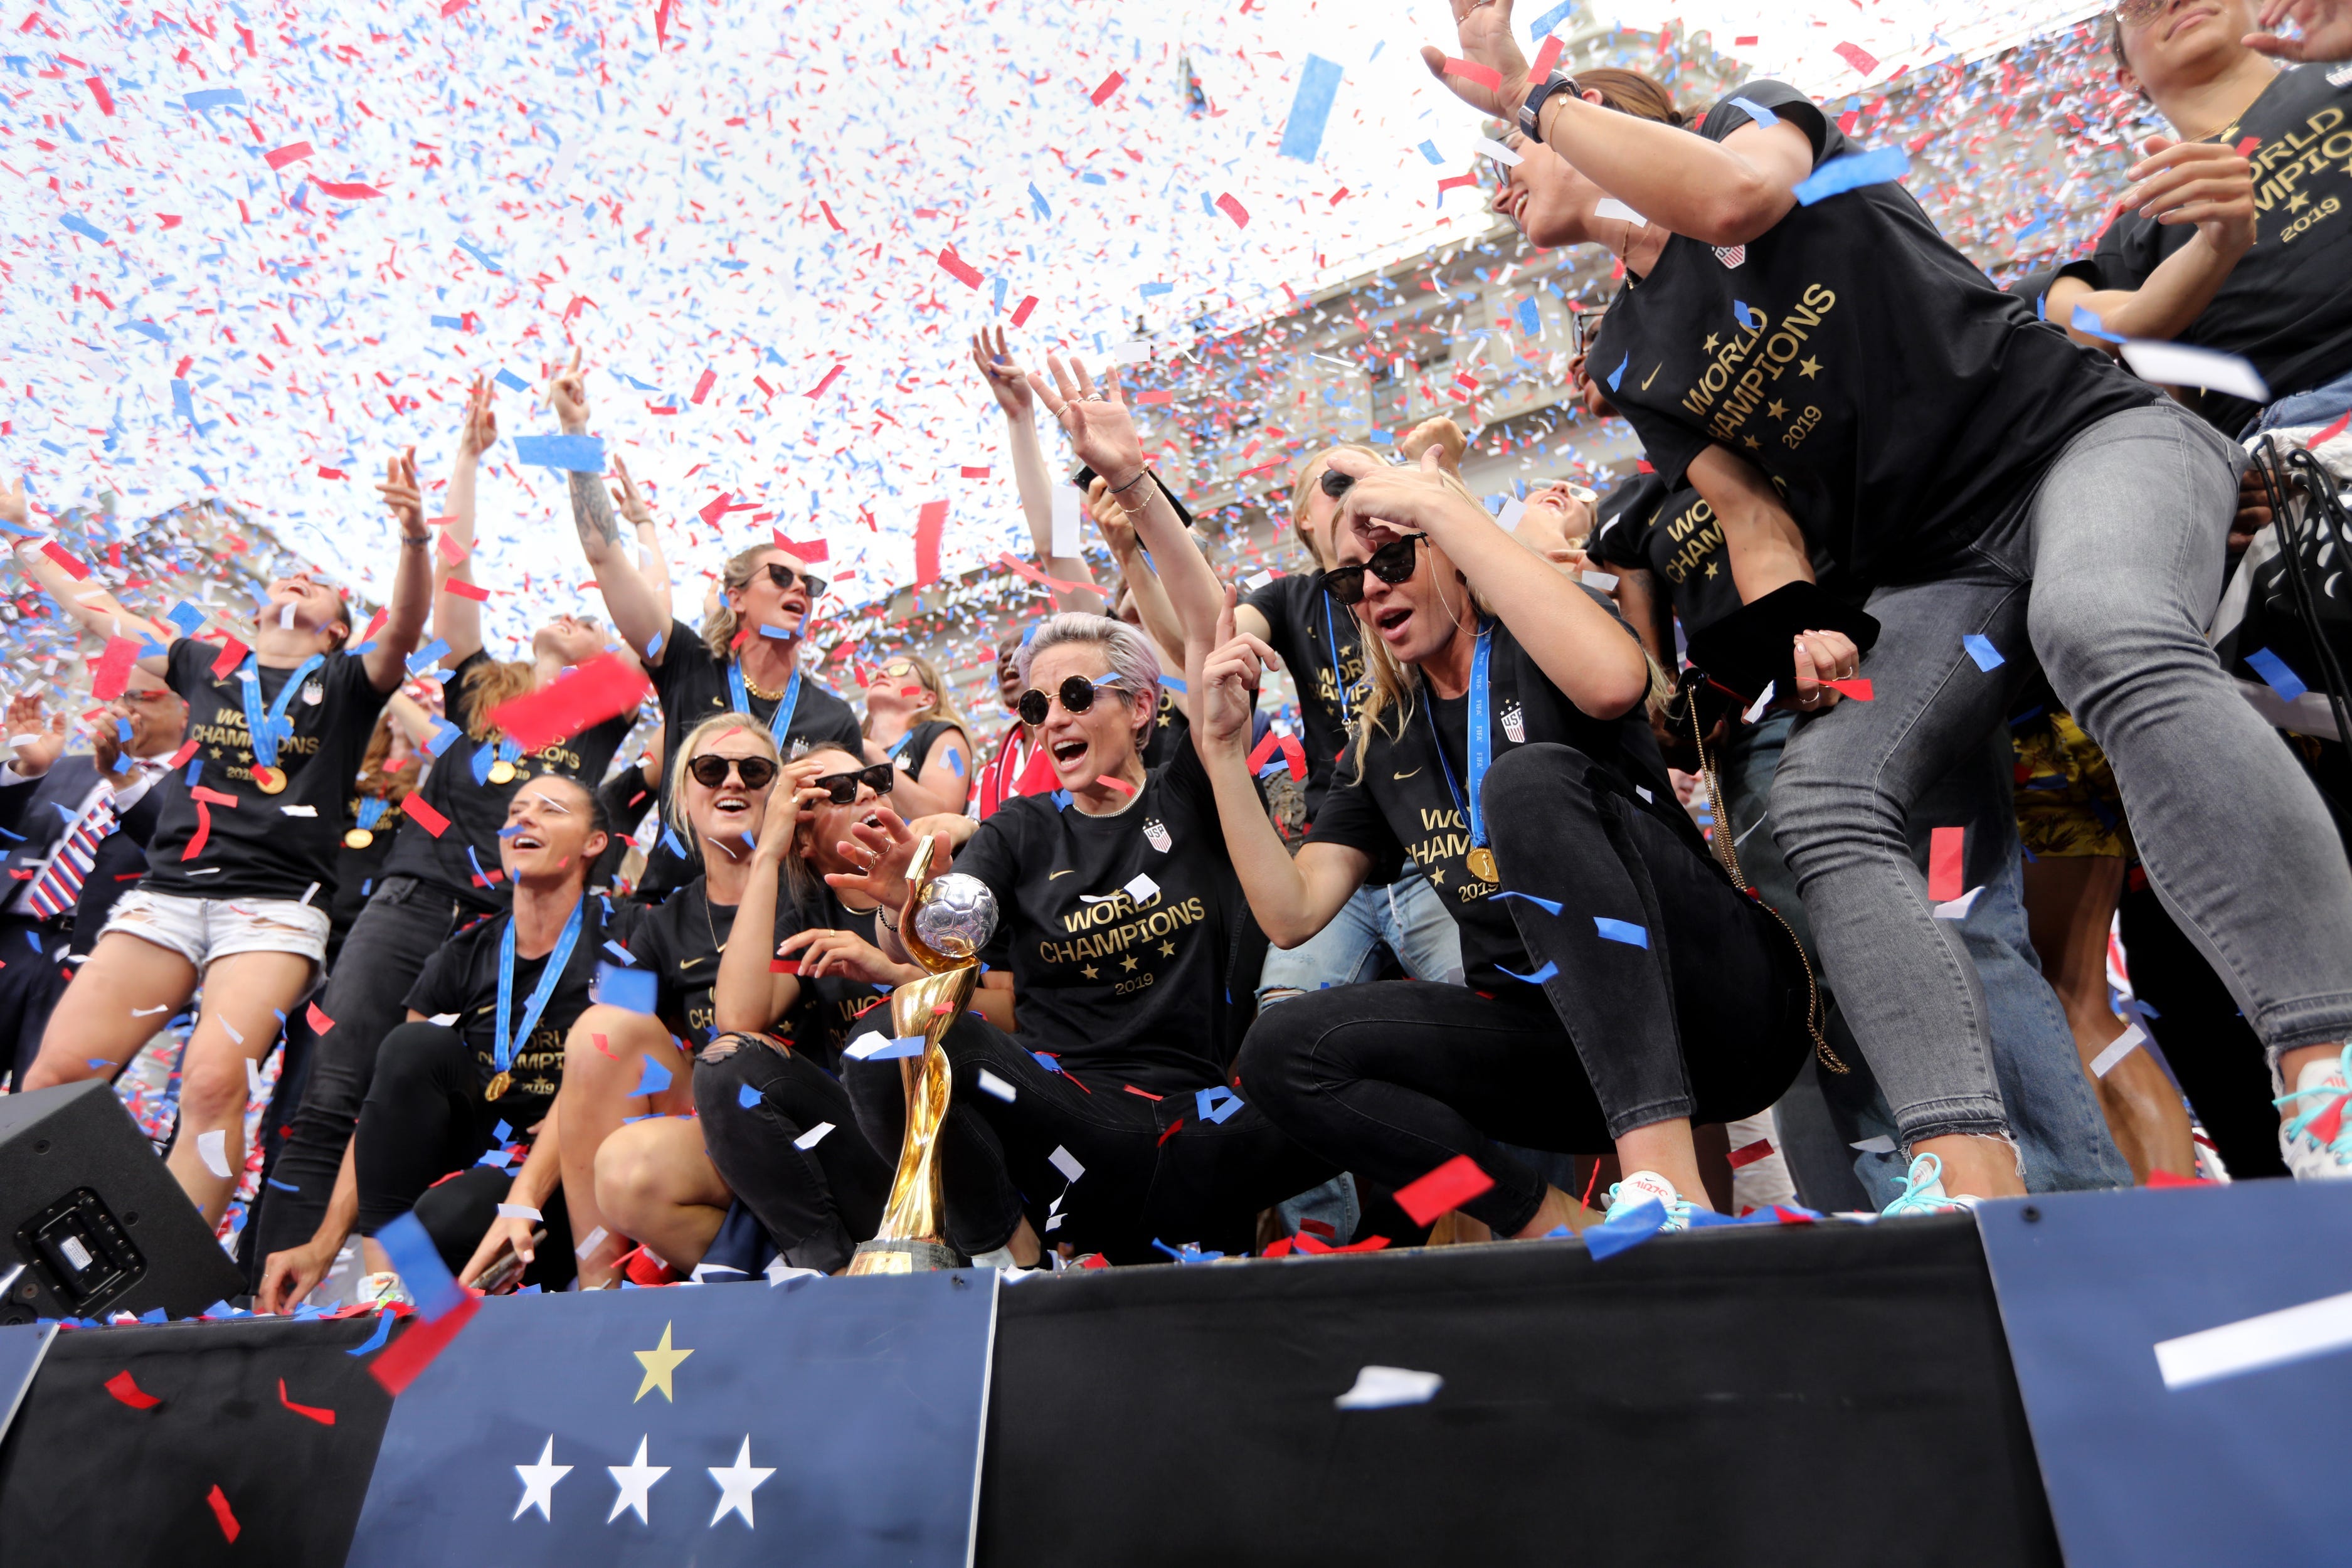 Megan Rapinoe (center, in front of trophy) and the U.S. Women's National Team, shown here after their 2019 World Cup win, finally achieved equal pay with a landmark settlement and new collective bargaining agreement in 2022.